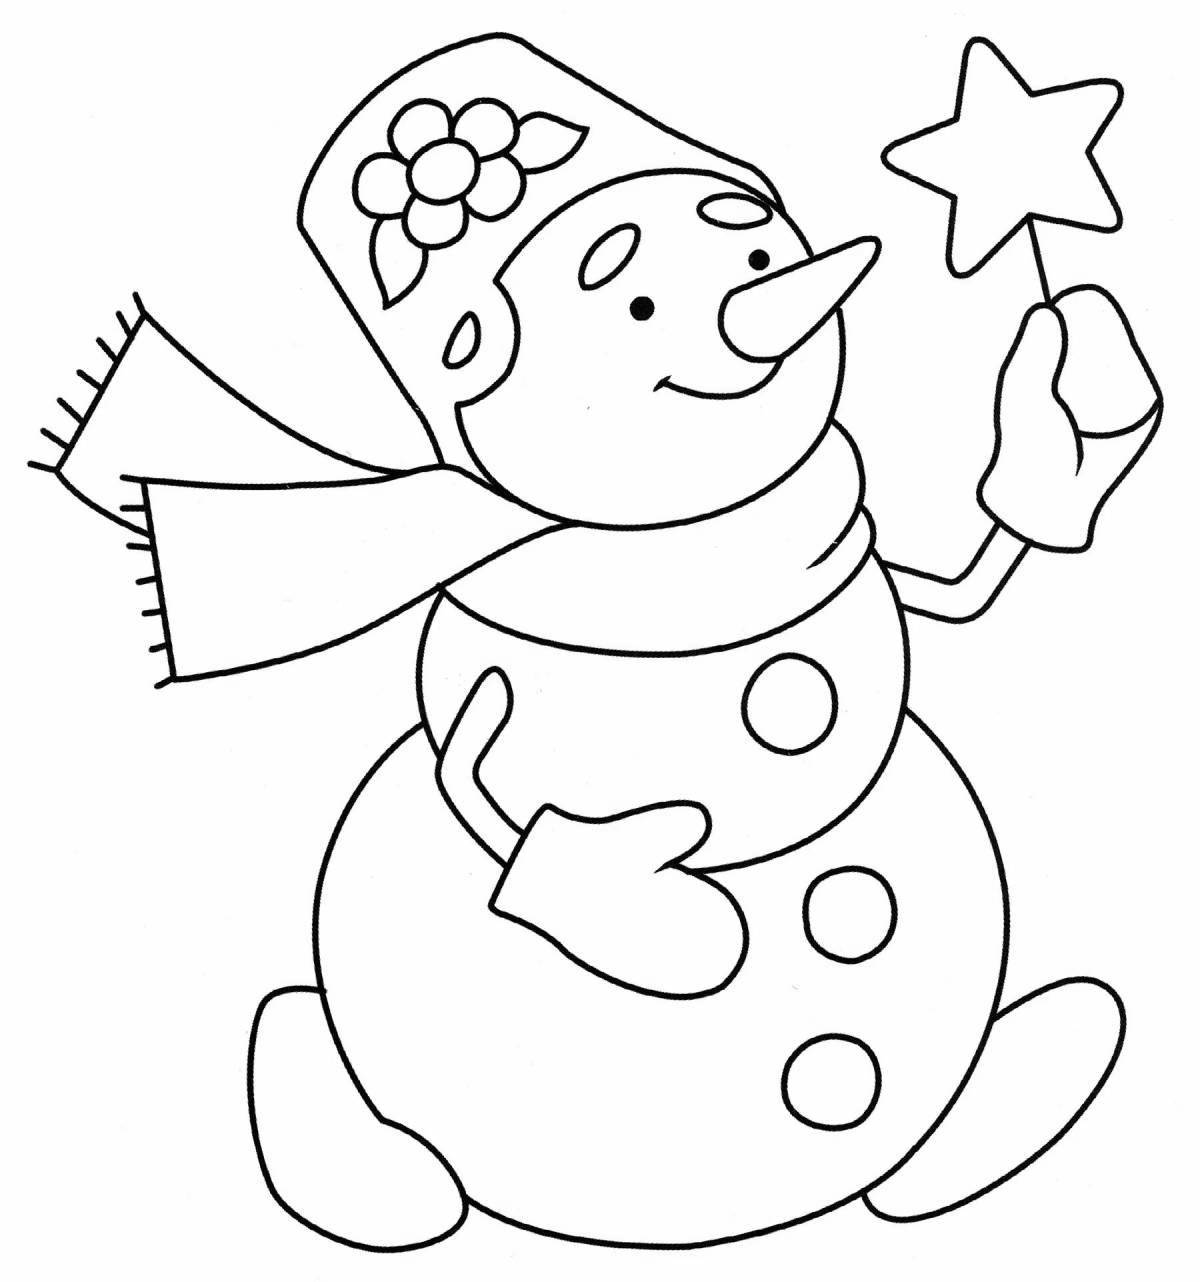 Fancy snowman coloring book for kids 3 4